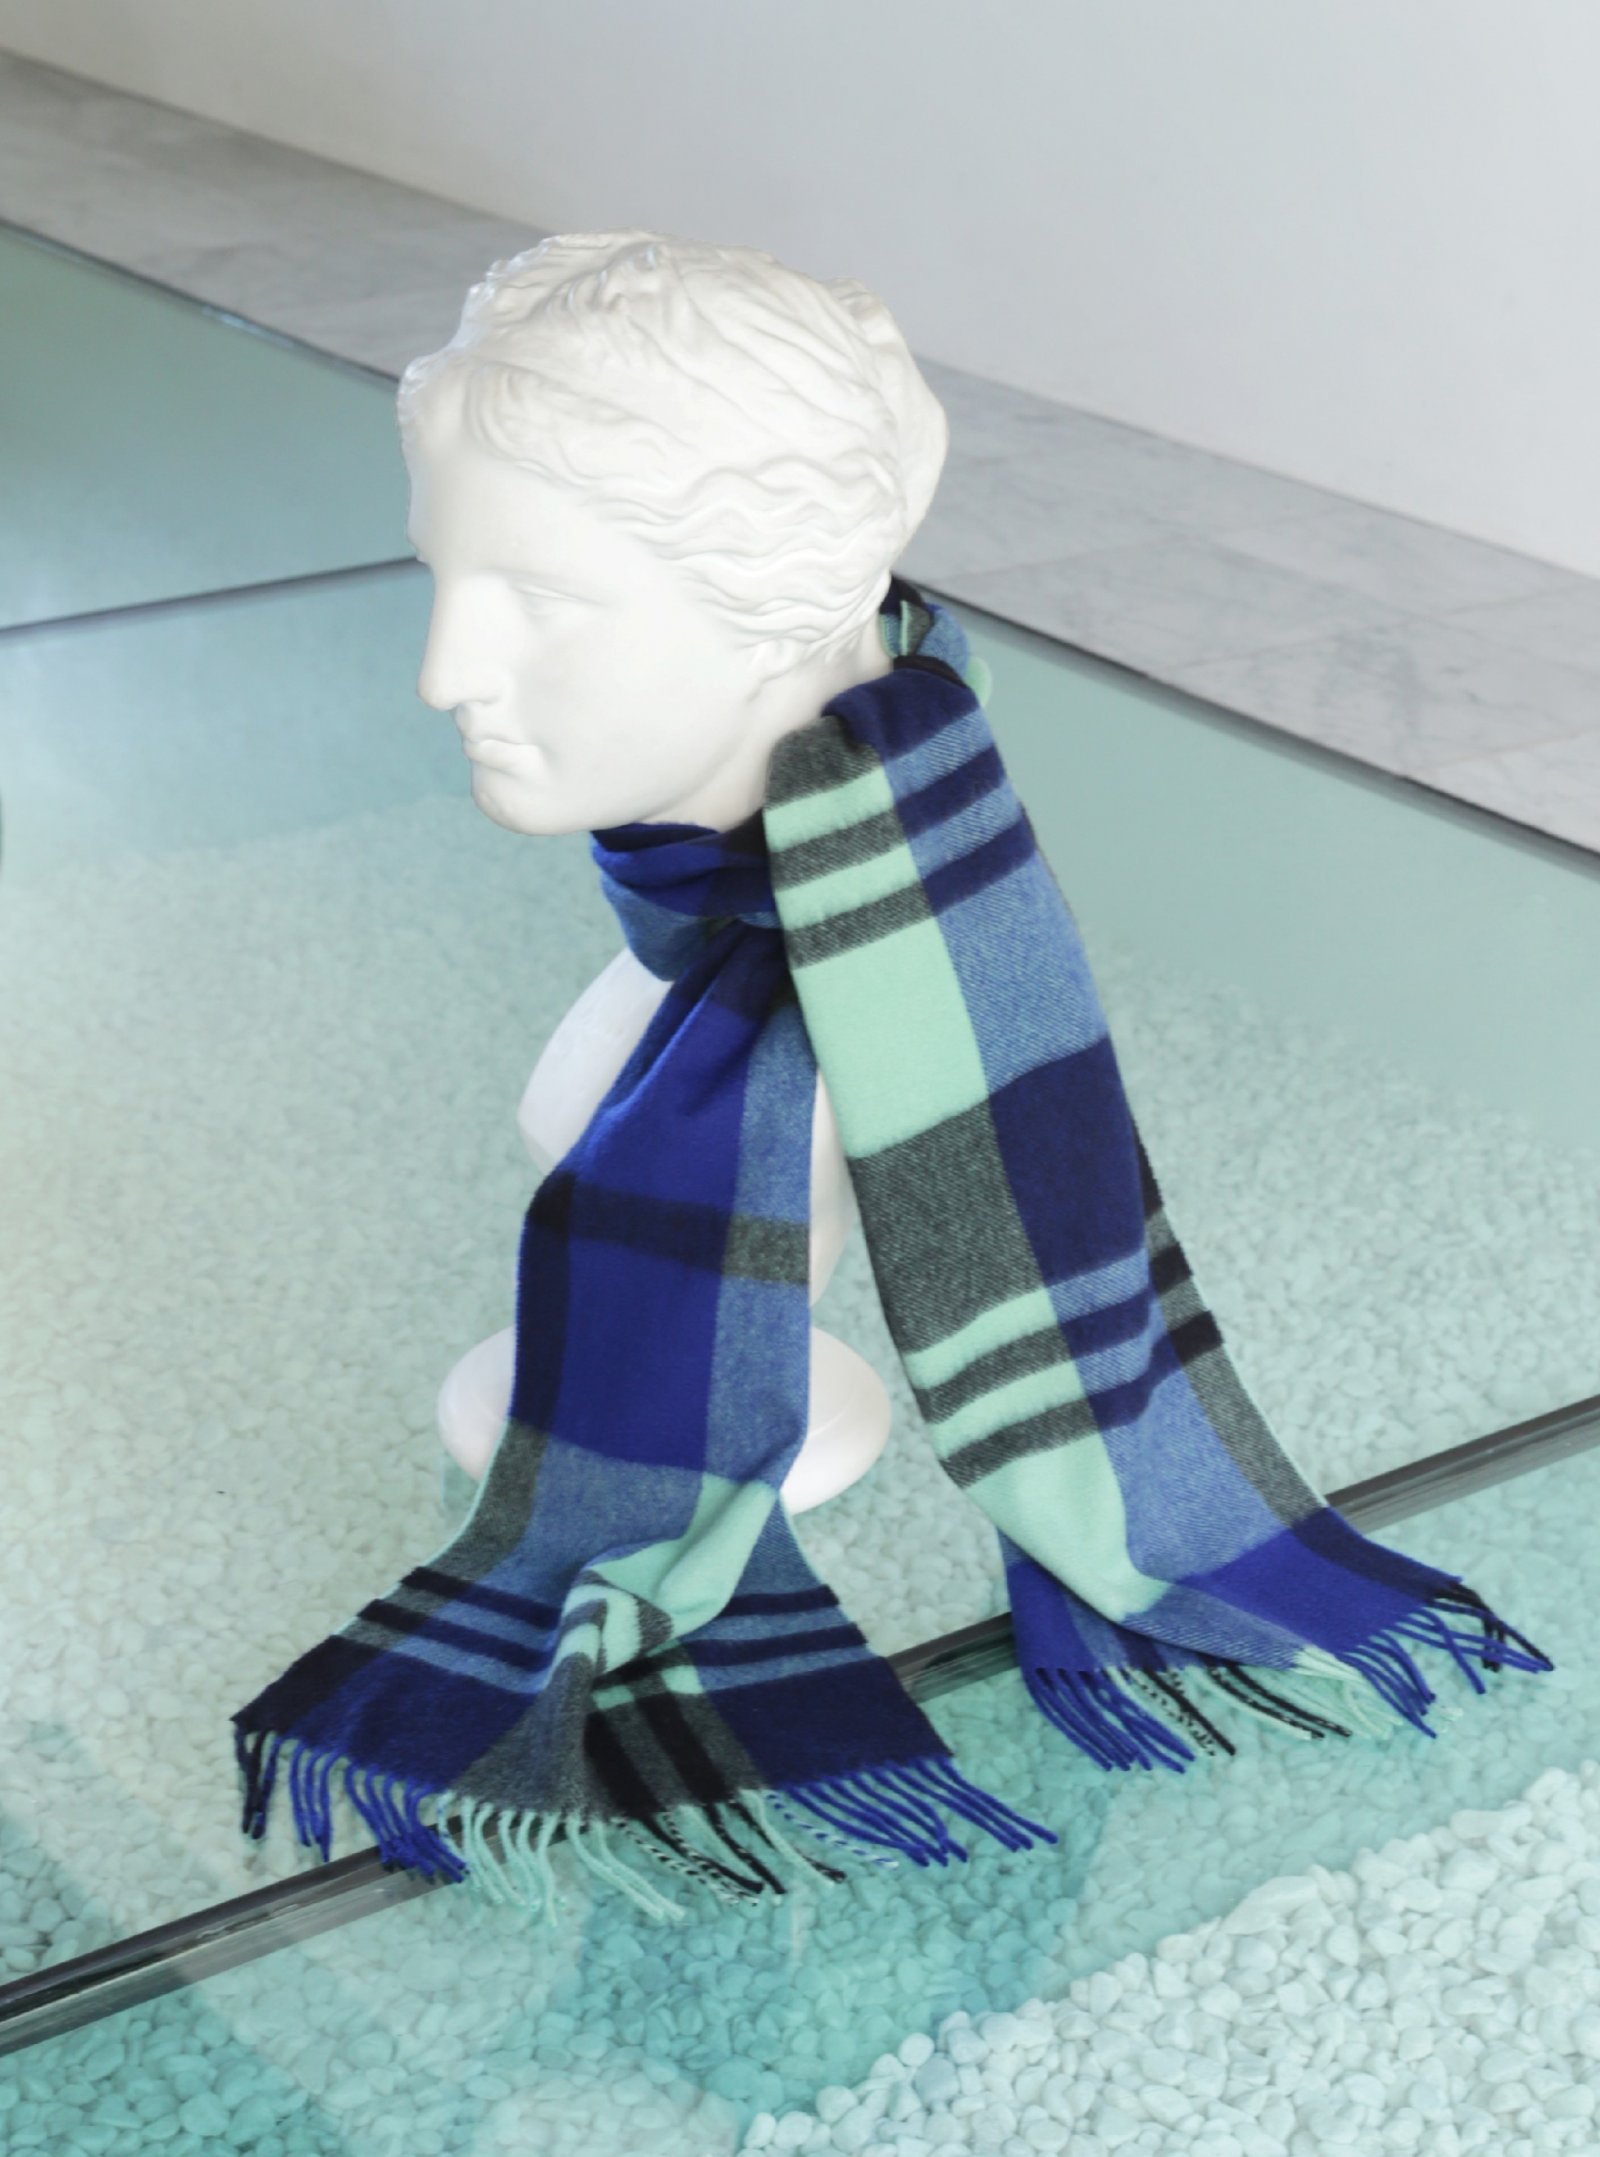 AURALEE CASHMERE CHECK STOLE 23aw マフラー - 小物